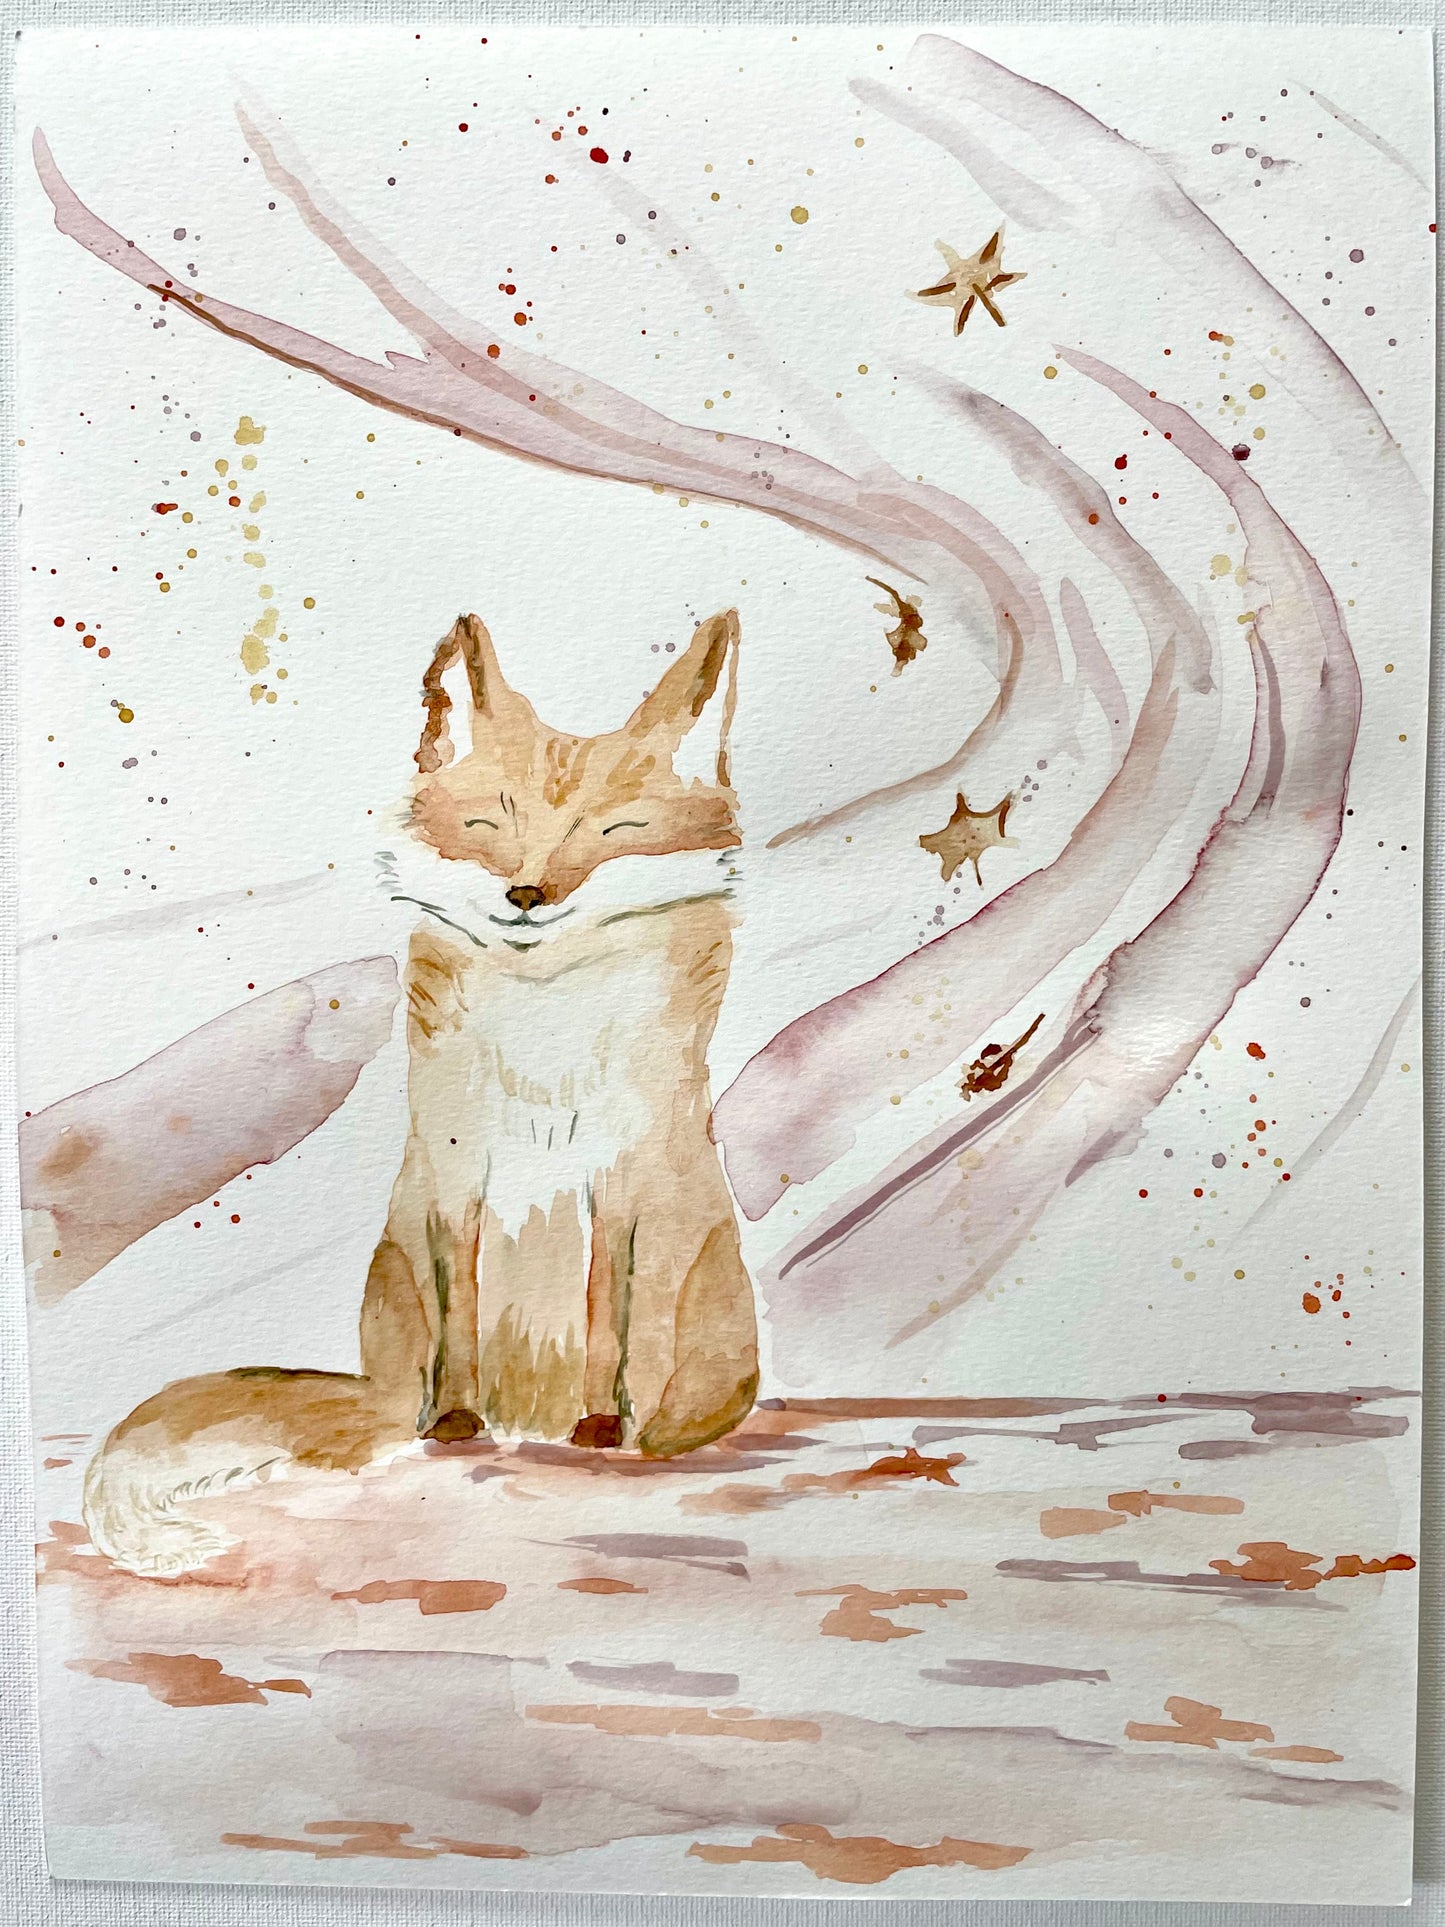 Sat, Oct 7th, 9-11A "Watercolor Fall Fox" Public Family Painting Class